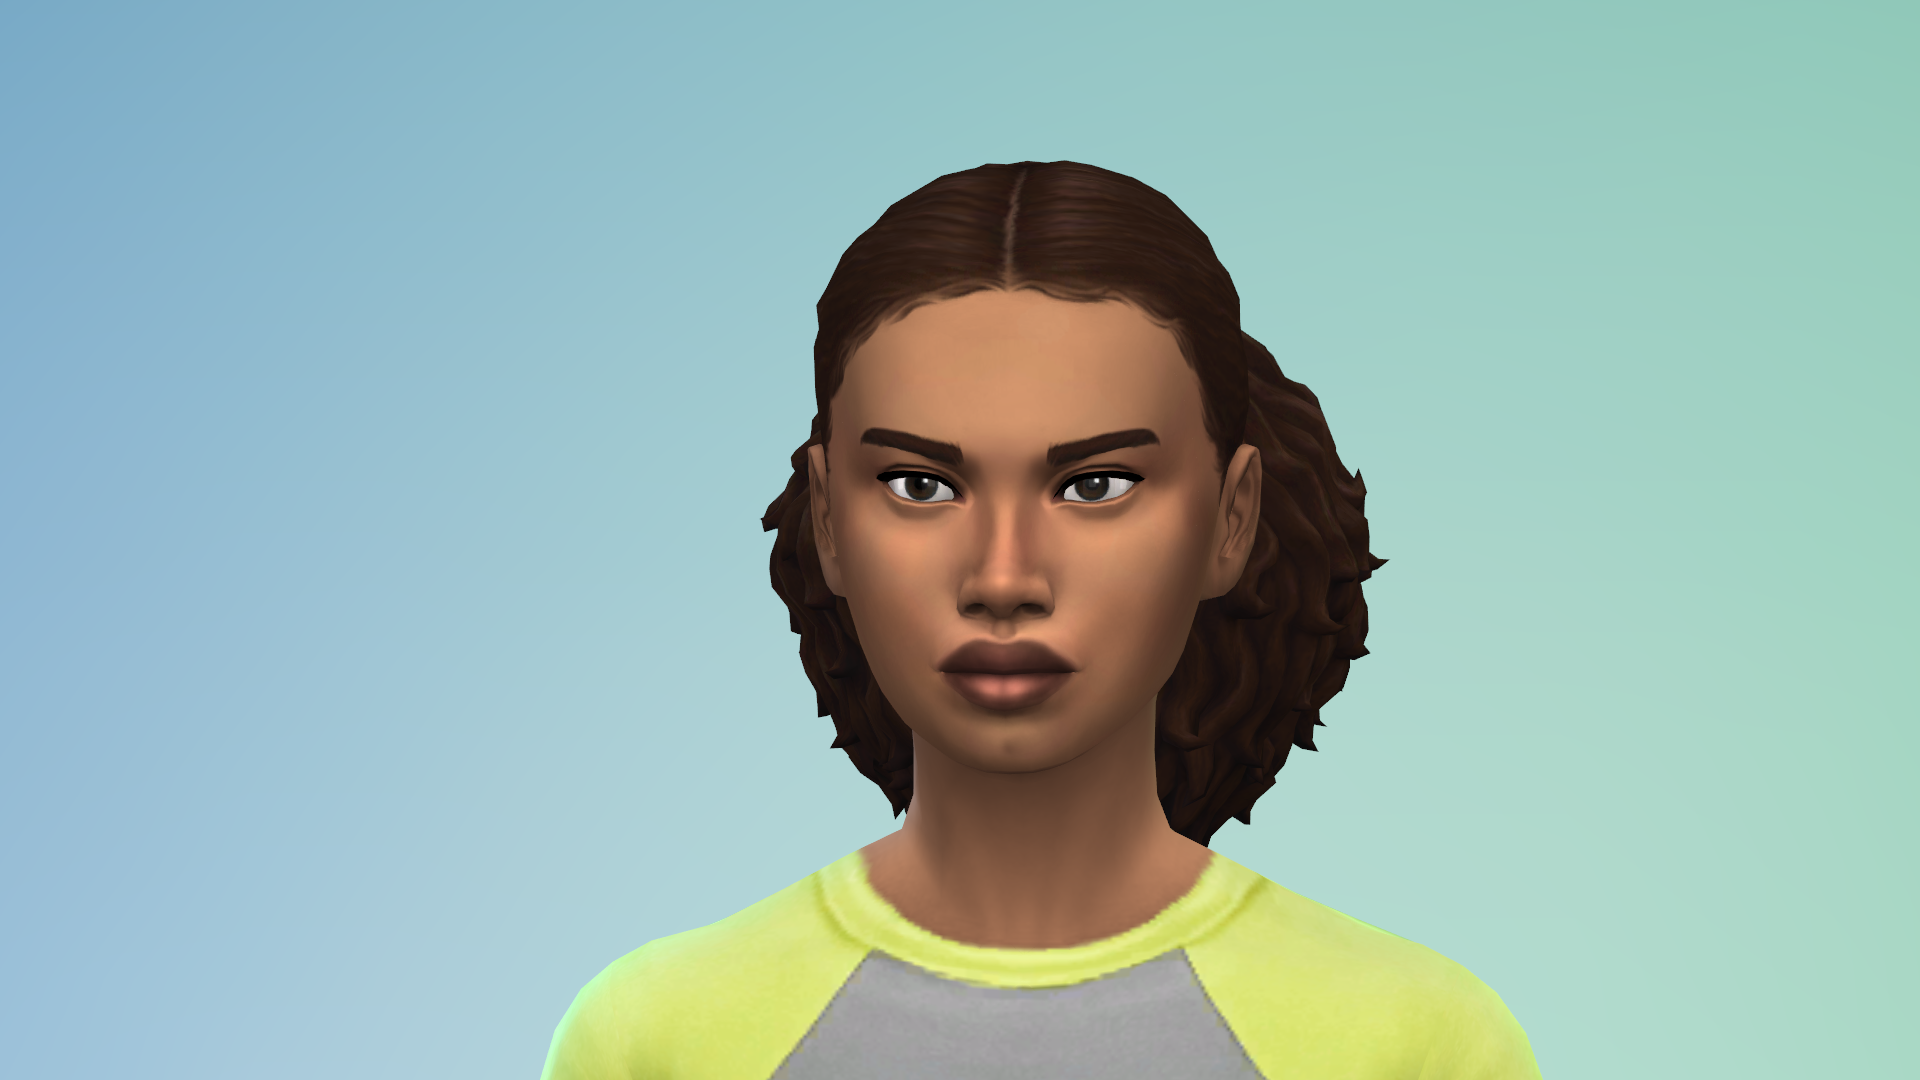 Sims 4 Delivery Express Beta 1.0.1 - New Hair - Front